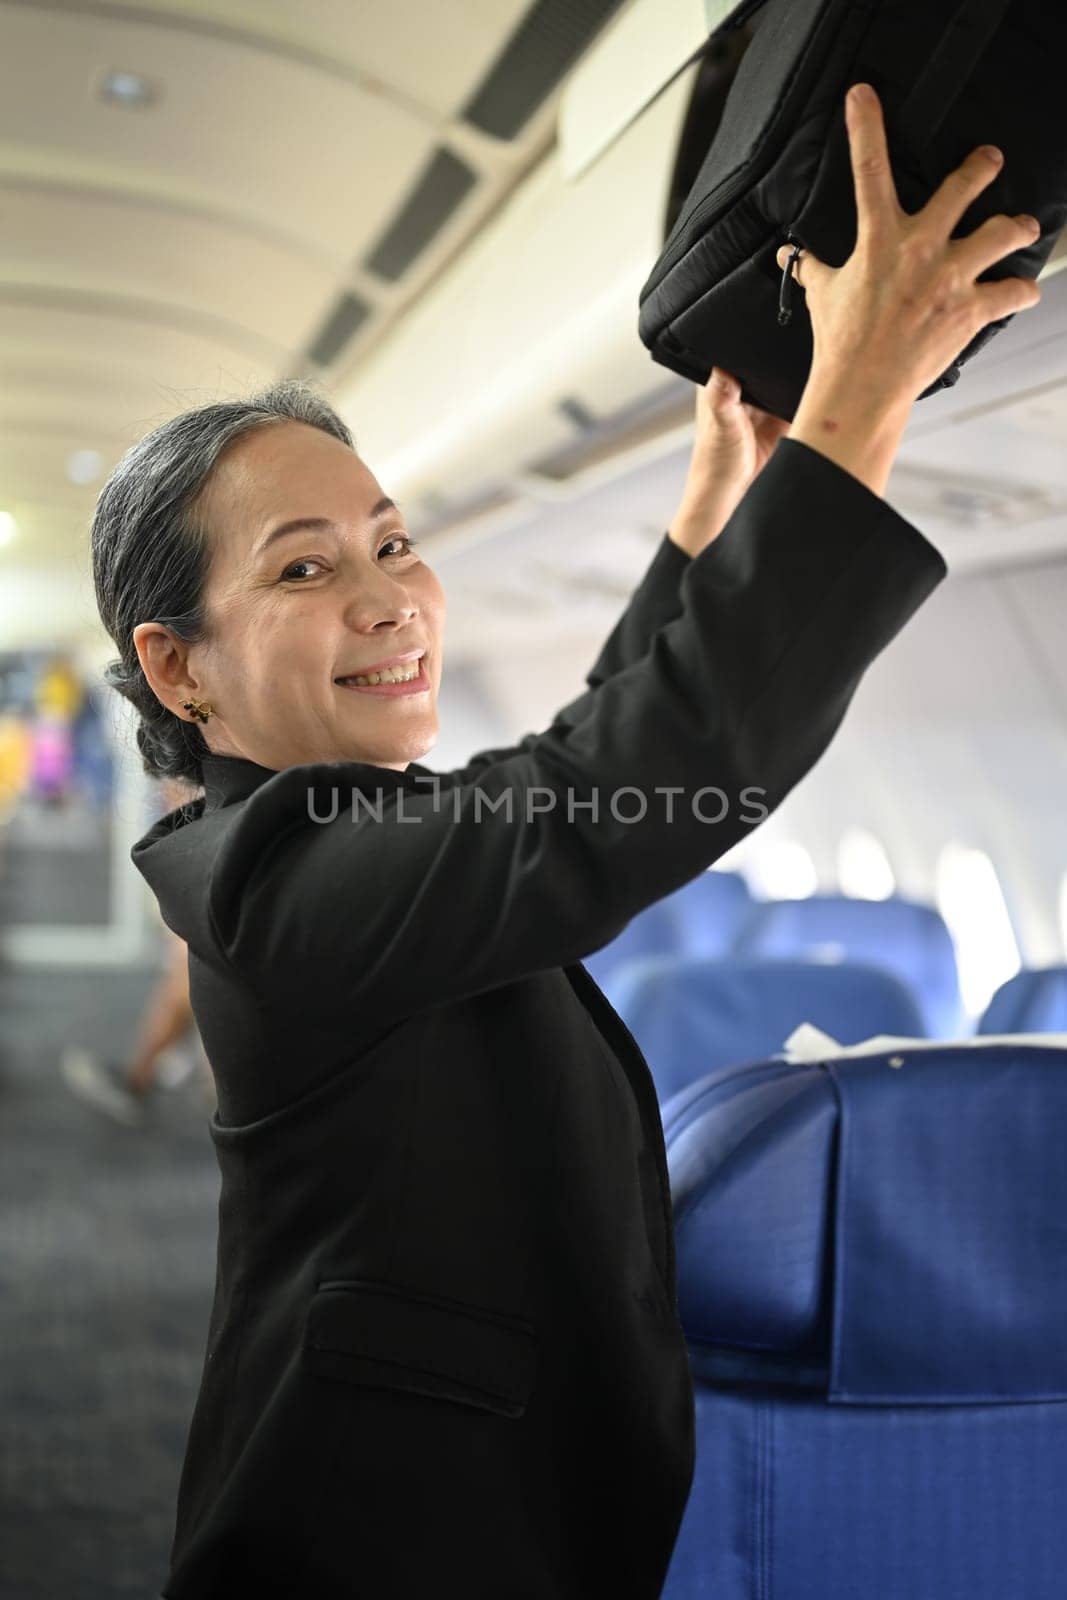 Smiling middle age woman passengers putting her luggage into the overhead compartment on an airplane.